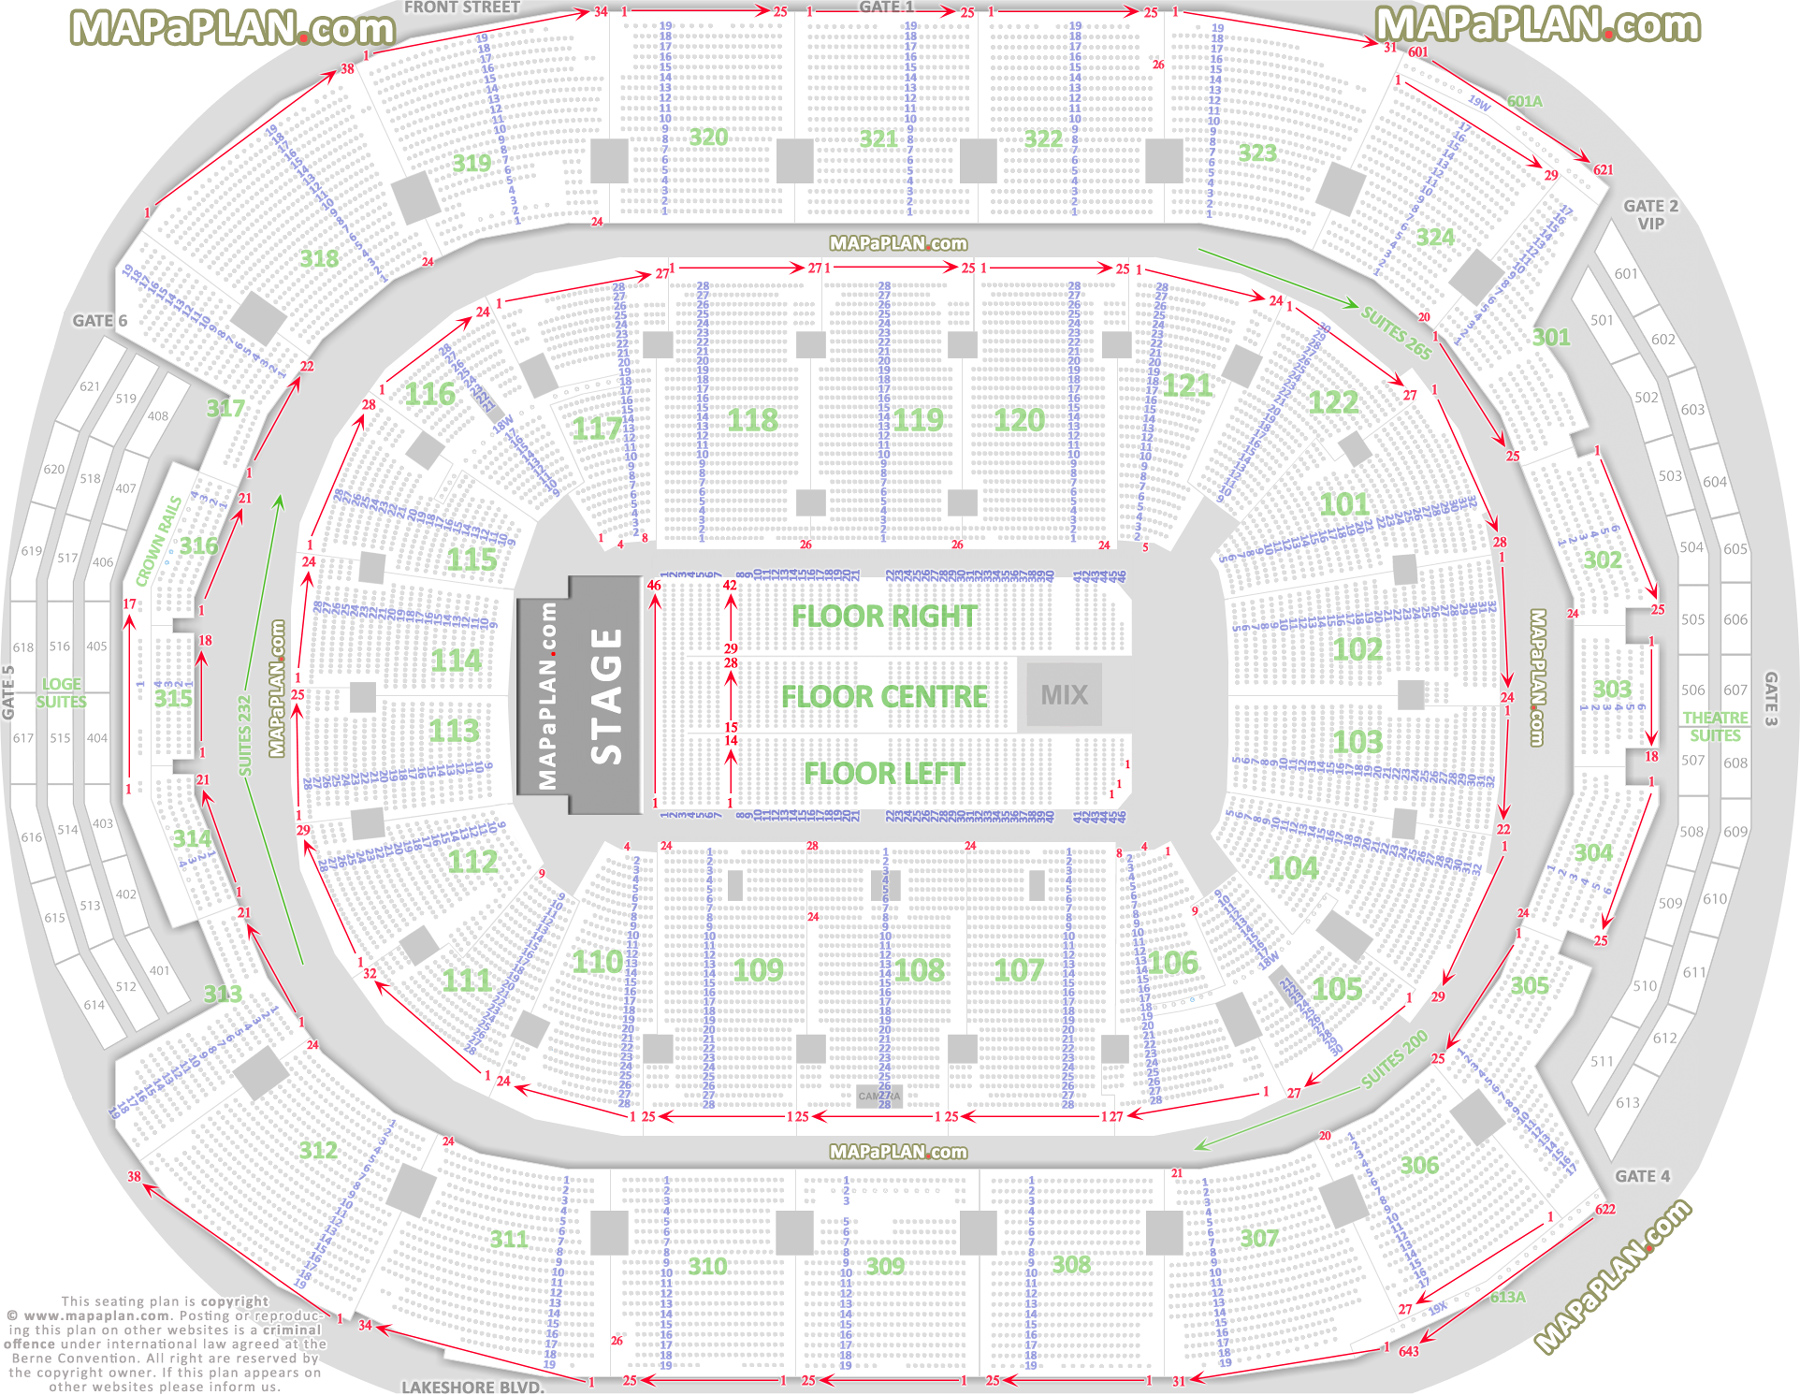 Detailed seat row numbers chart with west end stage concert floor plan layout Toronto Scotiabank Arena seating chart